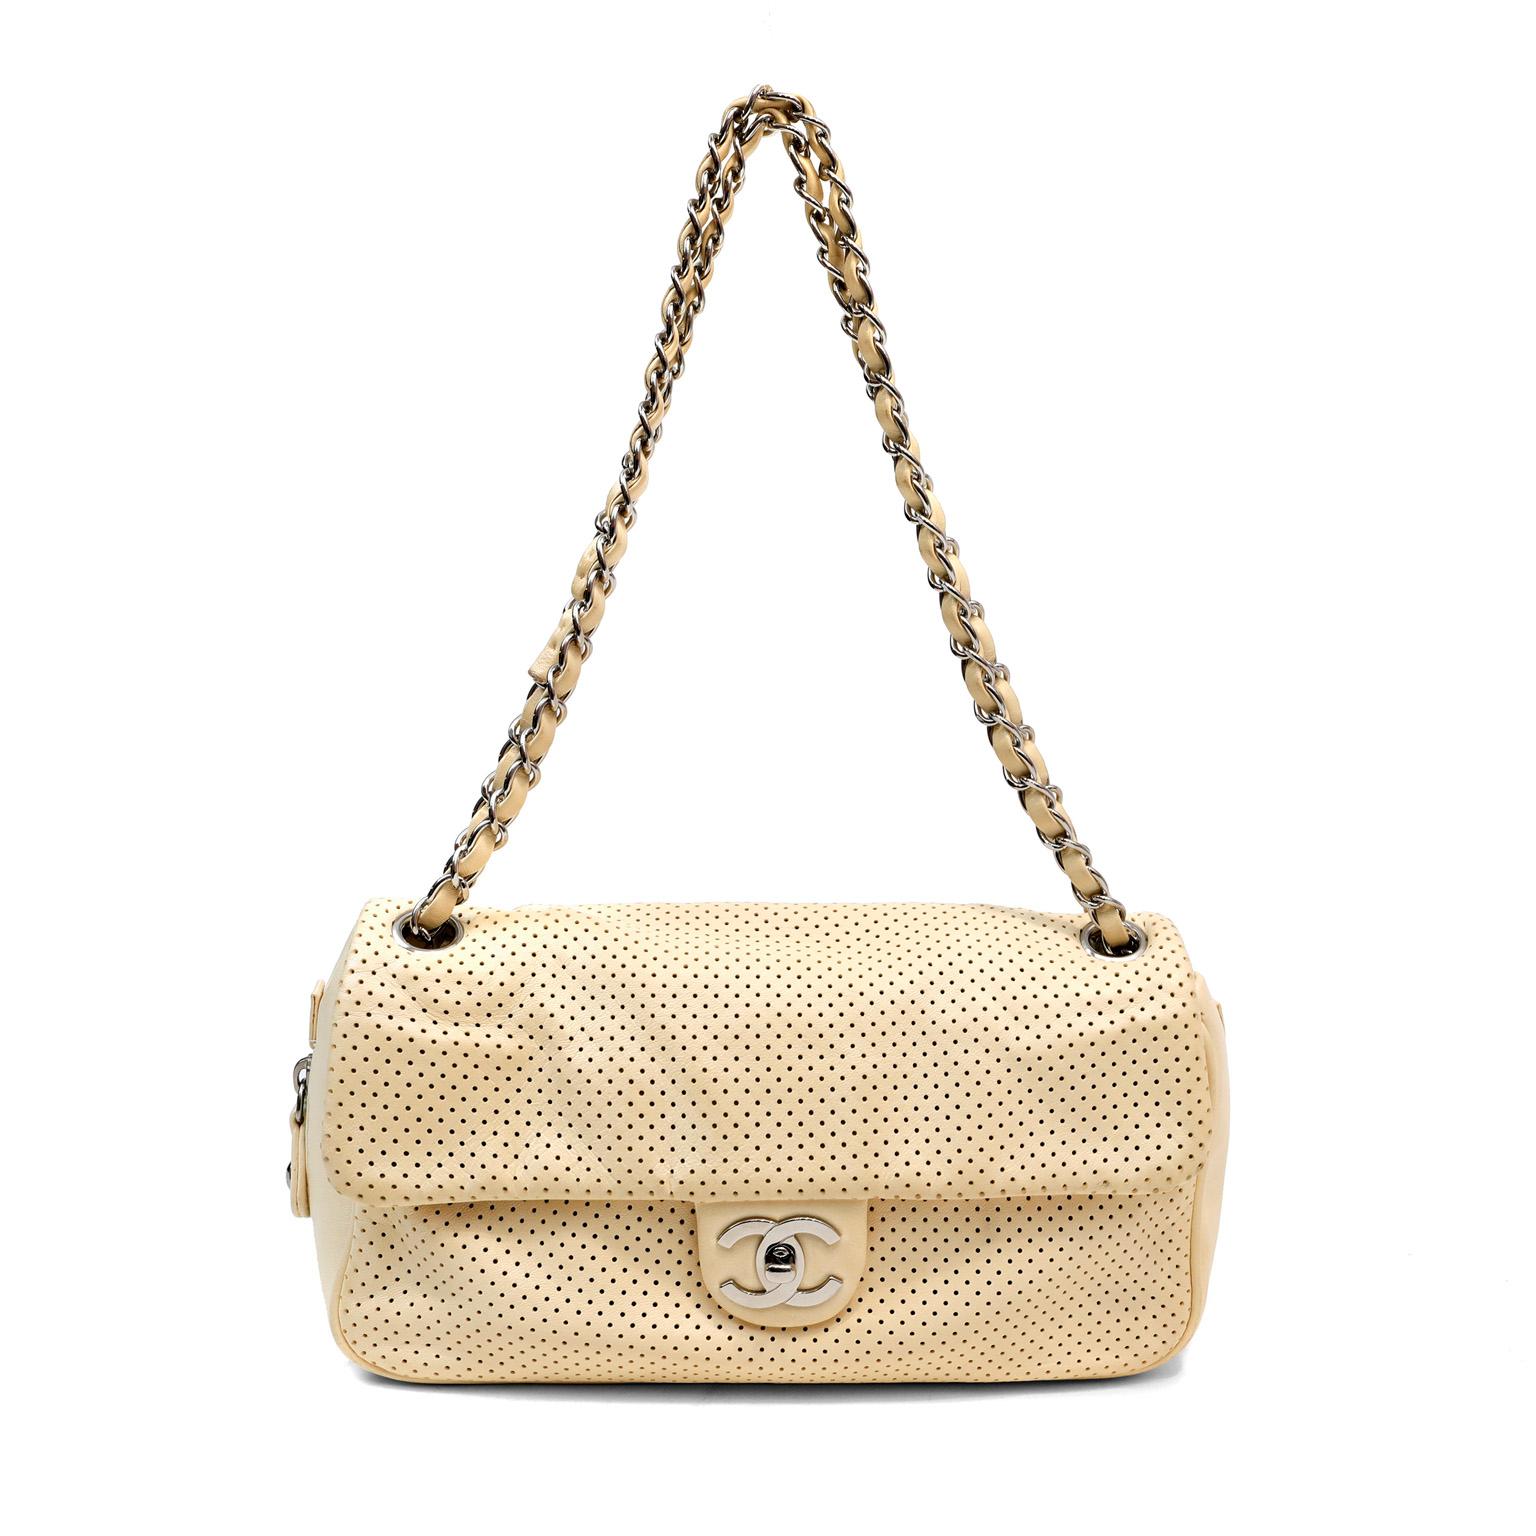 This authentic Chanel Pale Yellow Perforated Leather Baseball Spirit Flap Bag is in excellent plus condition. Perfectly scaled in the medium silhouette, this flap bag is ready to go anywhere day or evening.  Pale yellow perforated leather flap bag